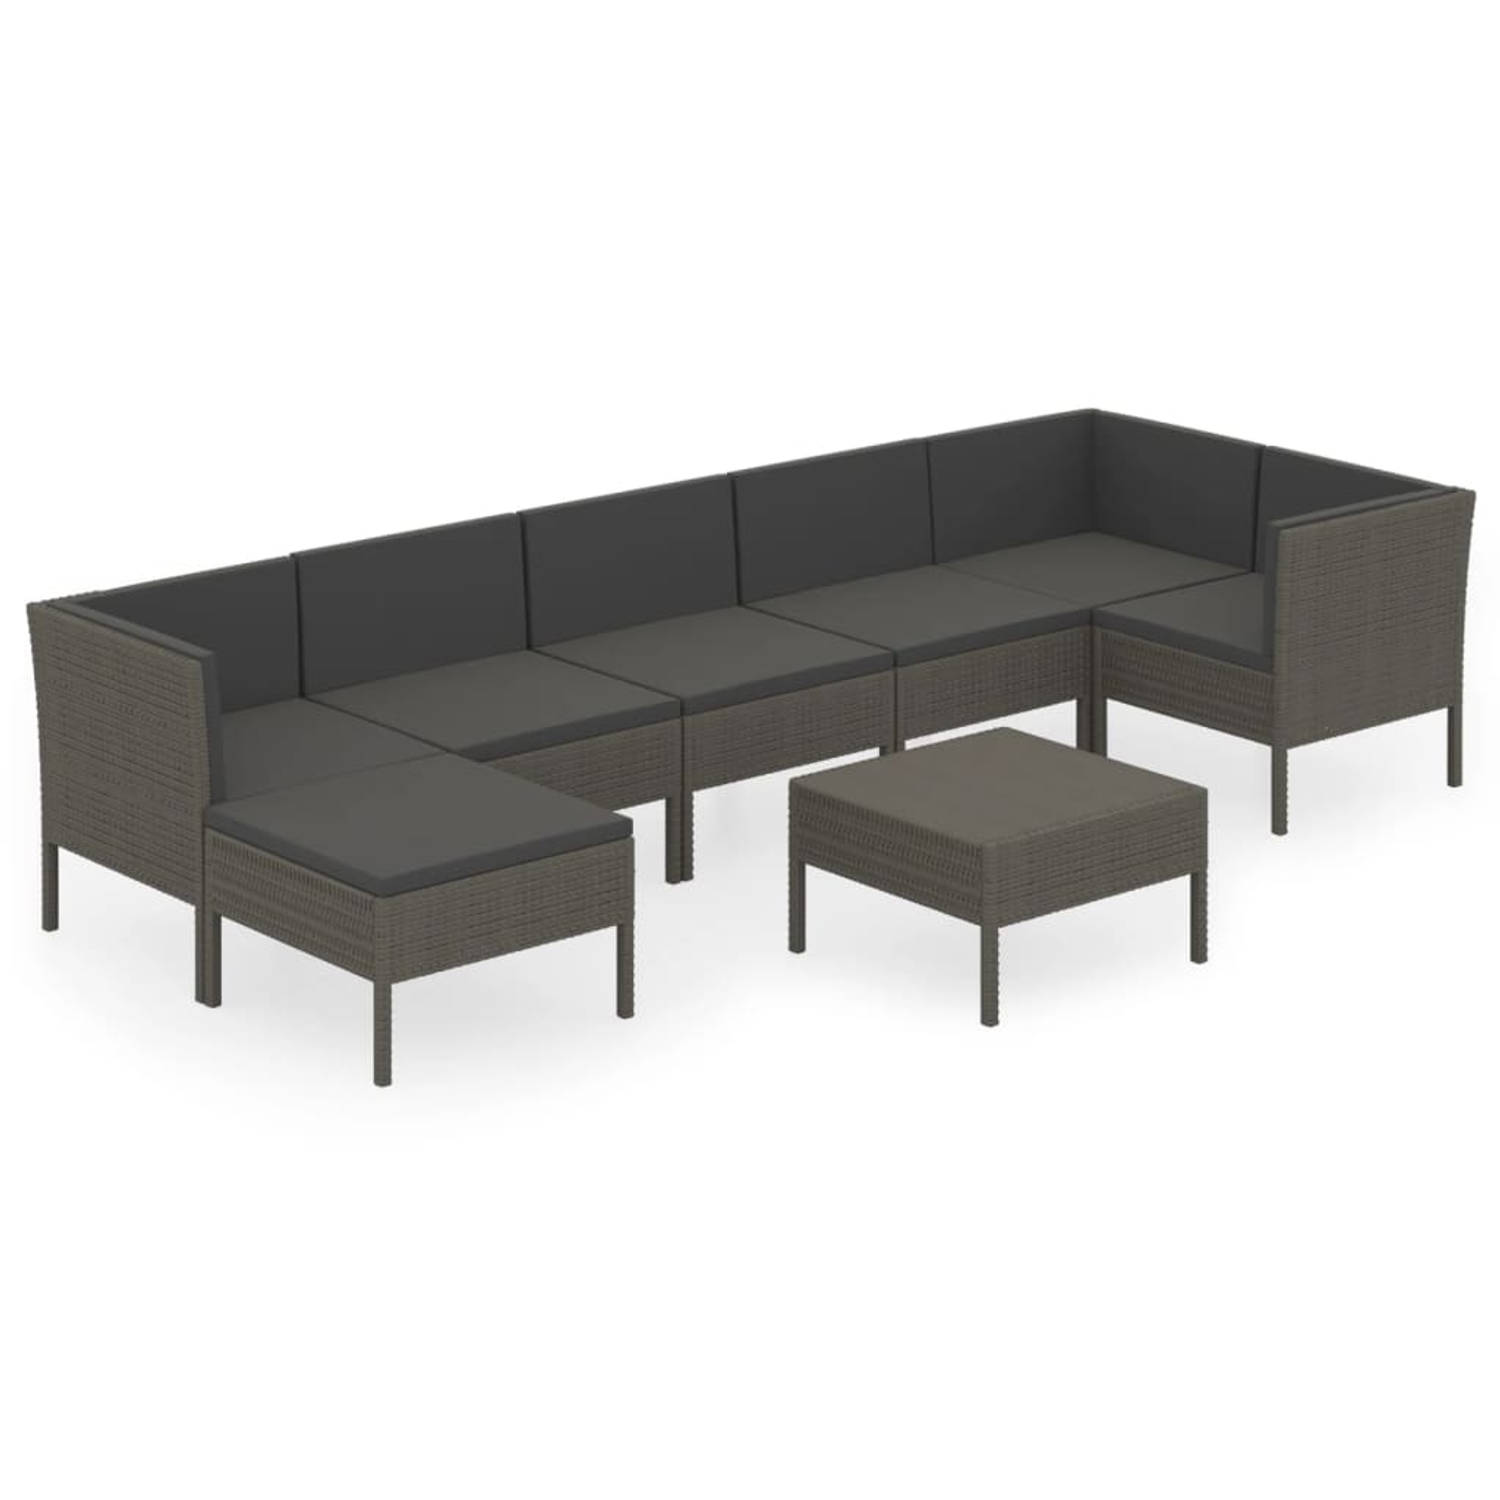 The Living Store Loungeset - Modulaire tuinmeubelset - Grijs - PE-rattan - Staal - Polyester